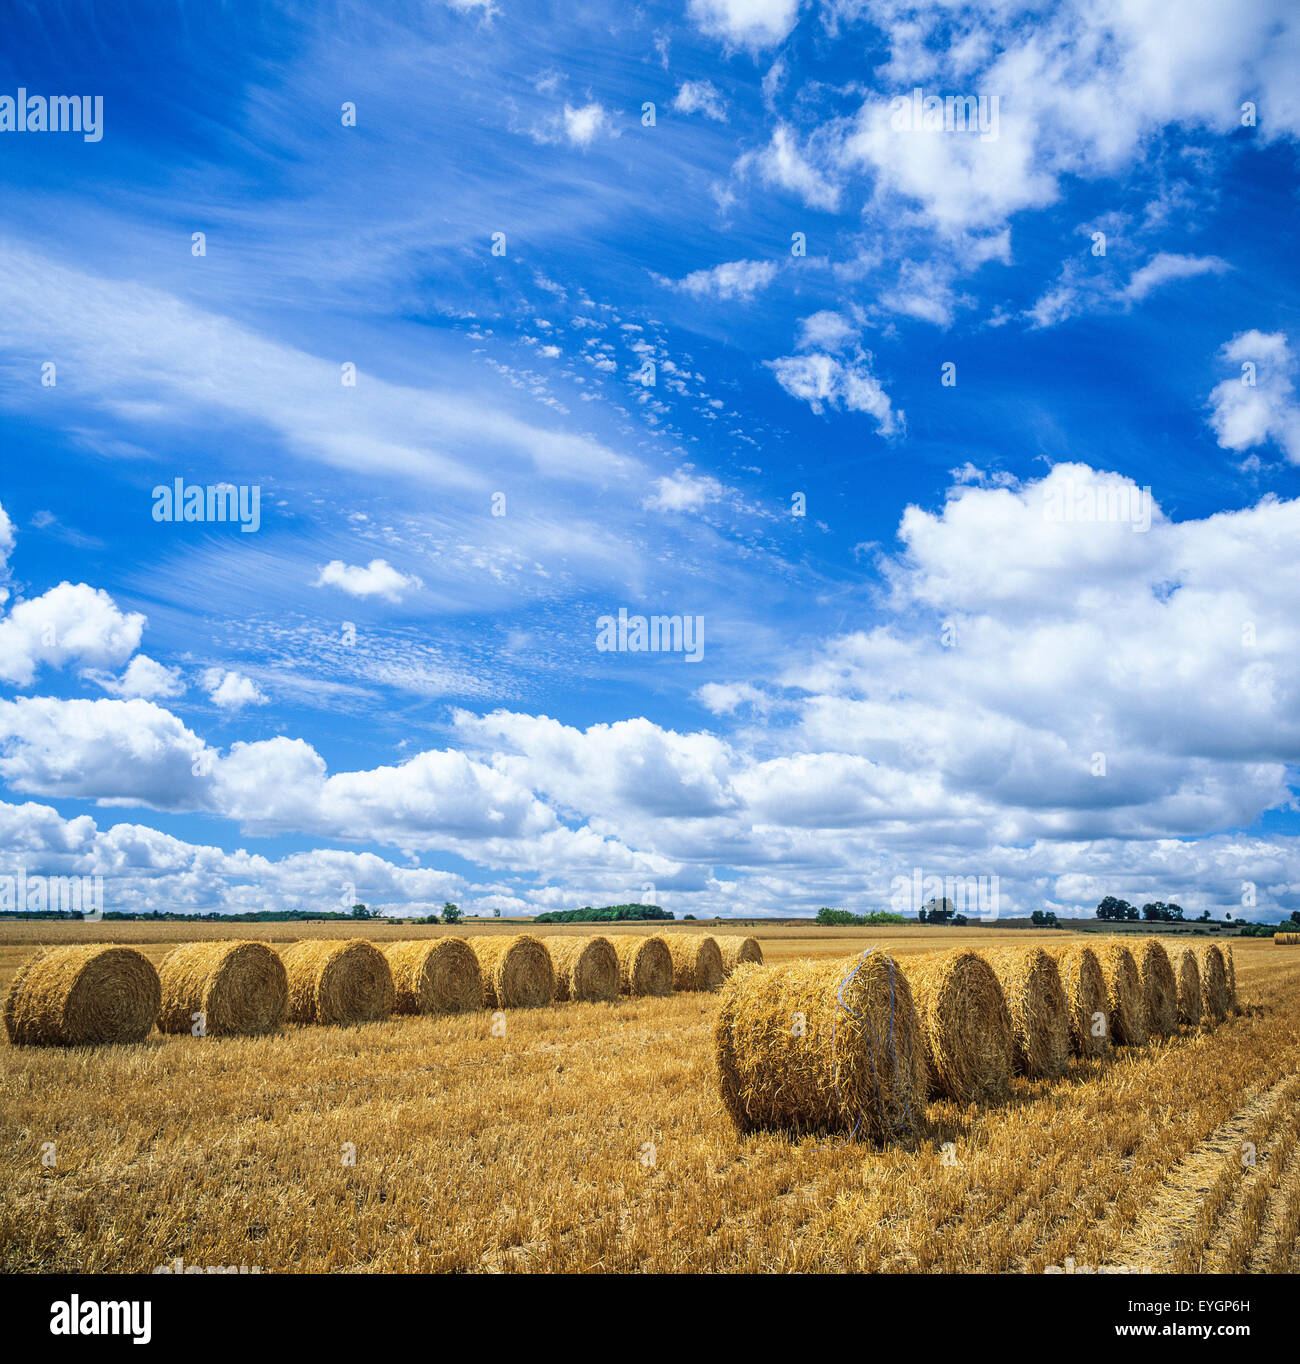 Harvested field with rows of straw bales, blue sky with puffy white clouds, Burgundy, France, Europe Stock Photo